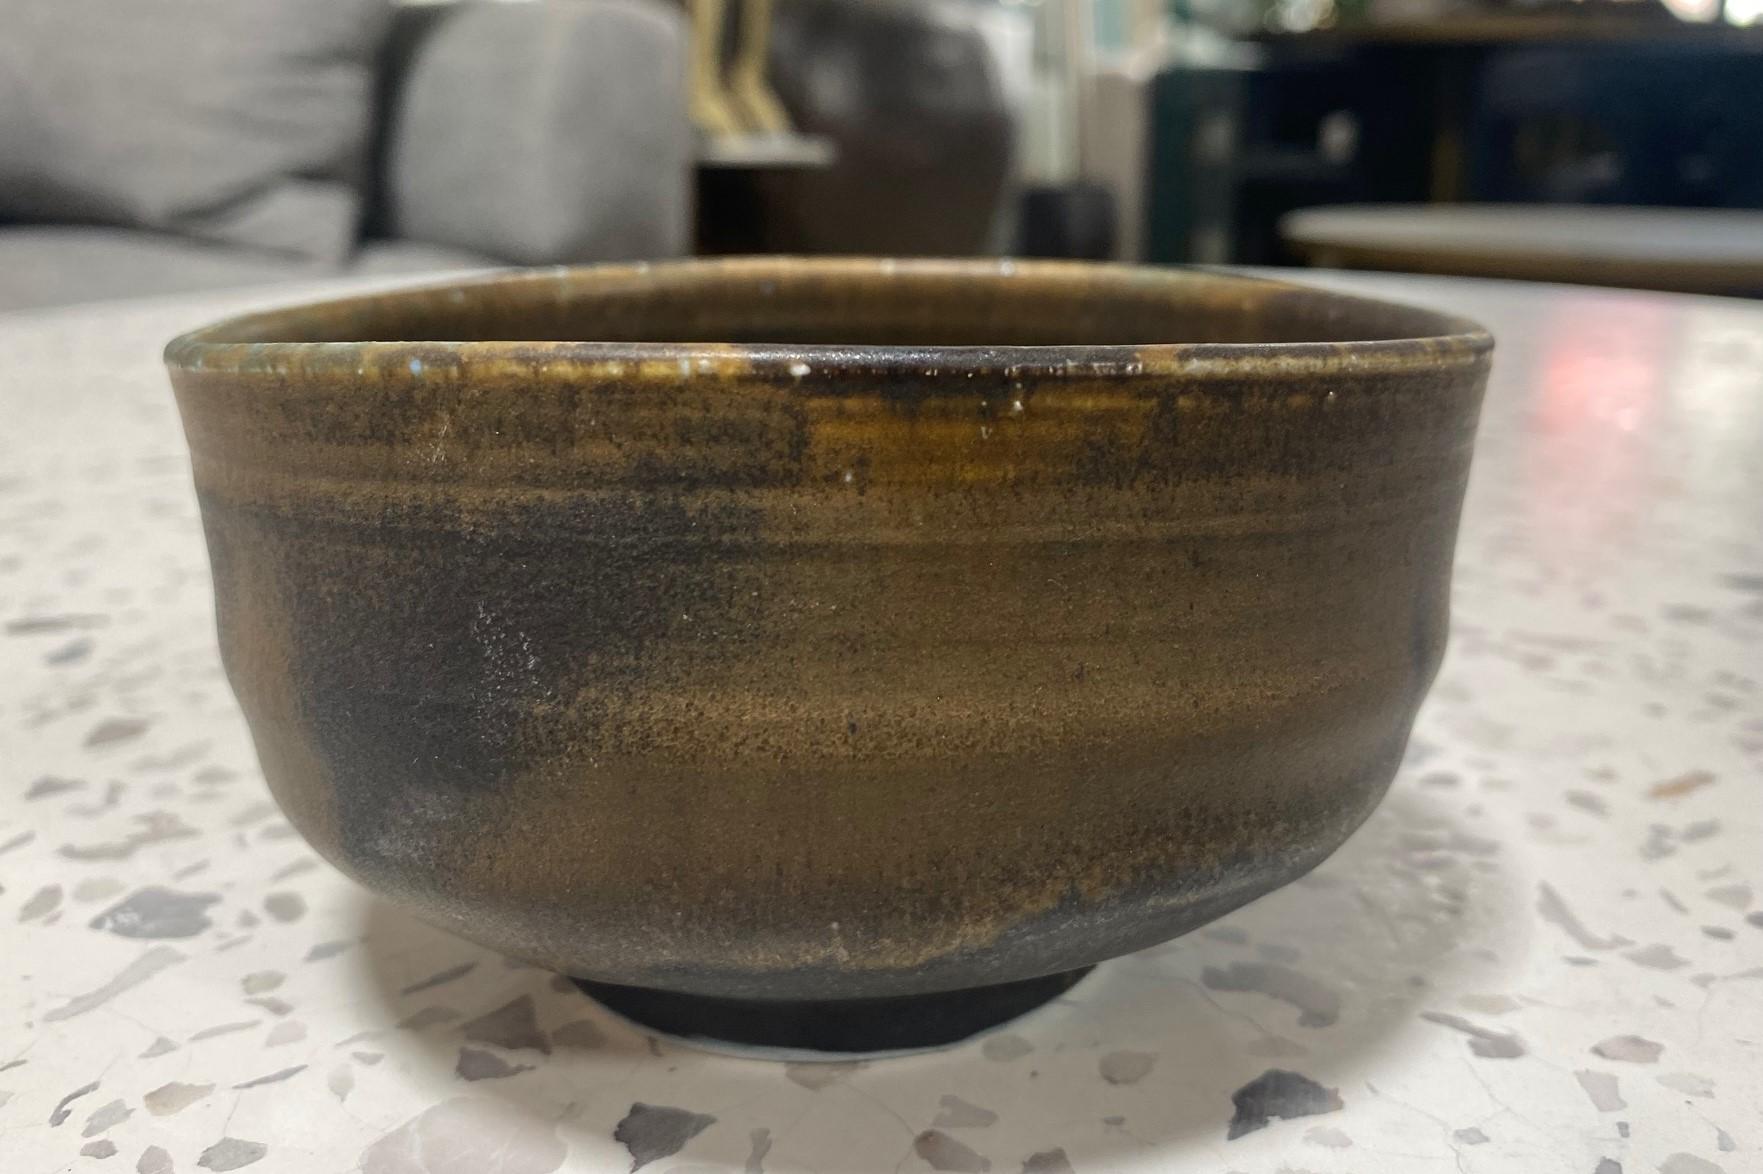 A beautiful and quite engaging sumptuously glazed Chawan tea bowl by famed Japanese Hawaiian American pottery master Toshiko Takaezu. The fired porcelain bowl features a vast array of dark-shifting, vibrant glazes (with muted earth tones of blacks,